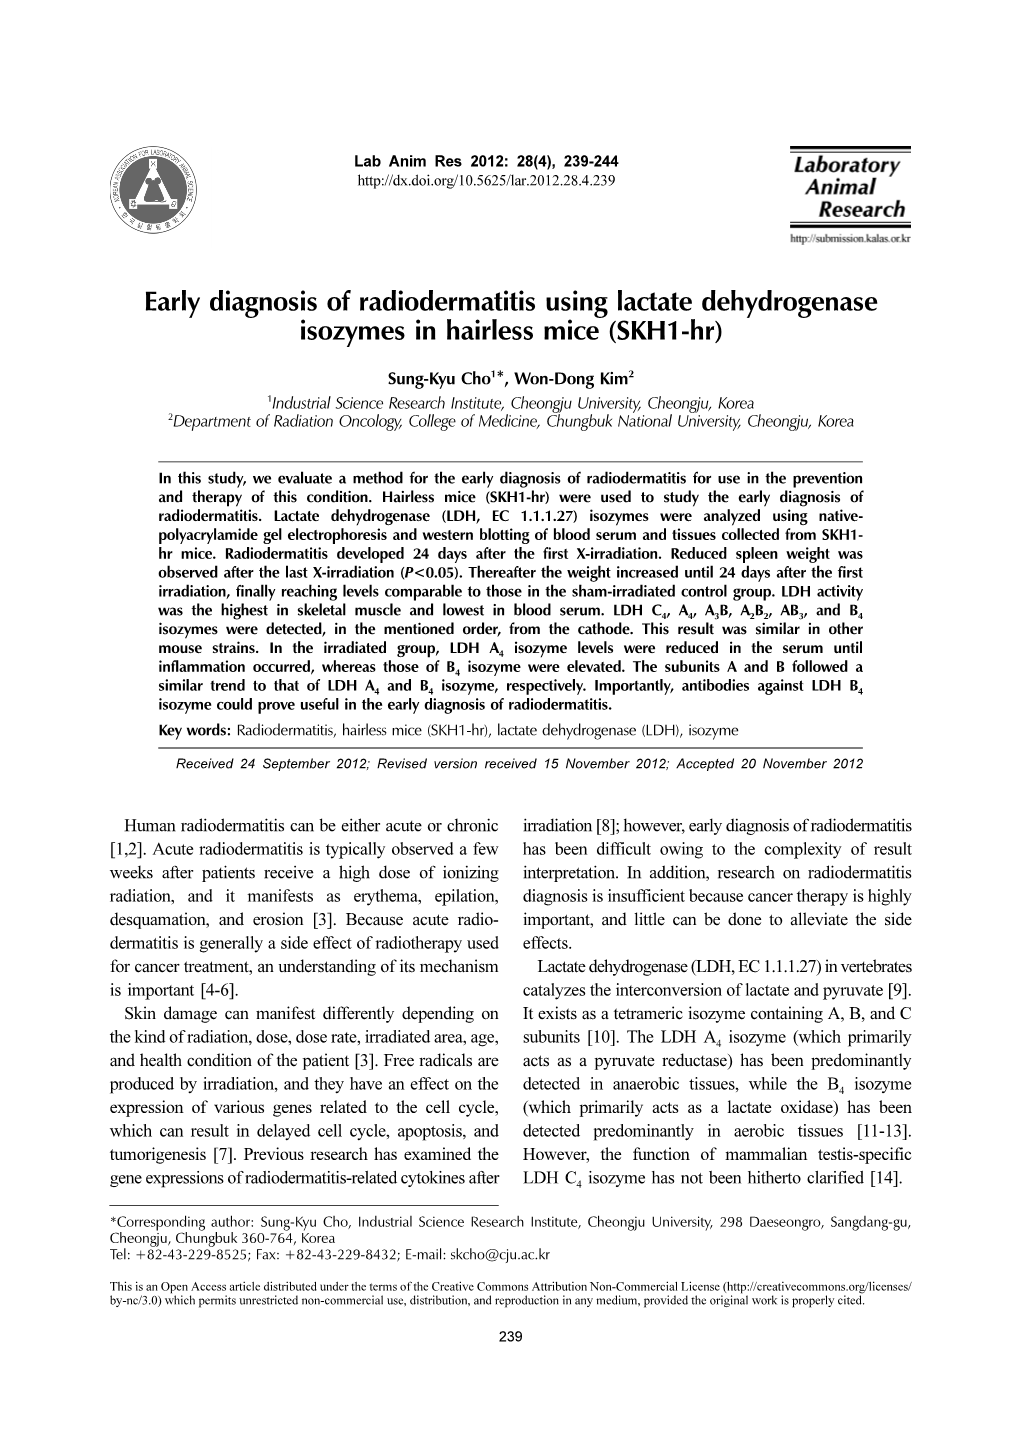 Early Diagnosis of Radiodermatitis Using Lactate Dehydrogenase Isozymes in Hairless Mice (SKH1-Hr)